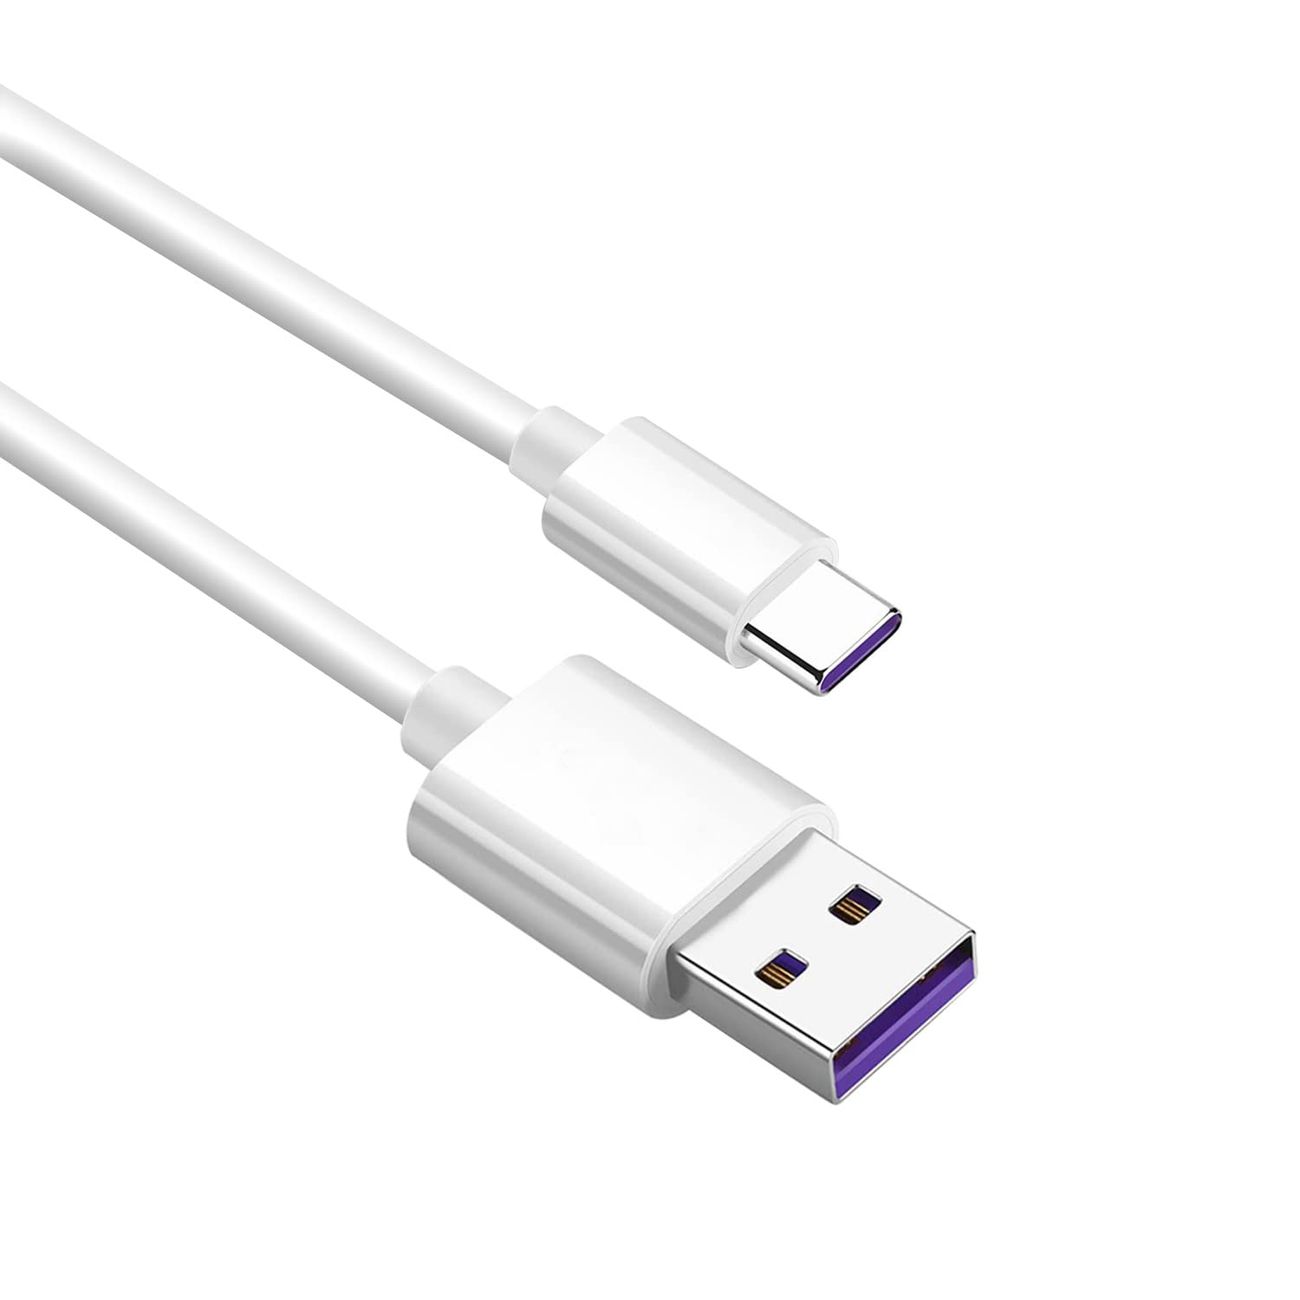 CABLE TYPE C XIAOMI COPY 1 USB DATA & CHARGE FOR SMARTPHONE 5.0A, Other Smartphone Acc